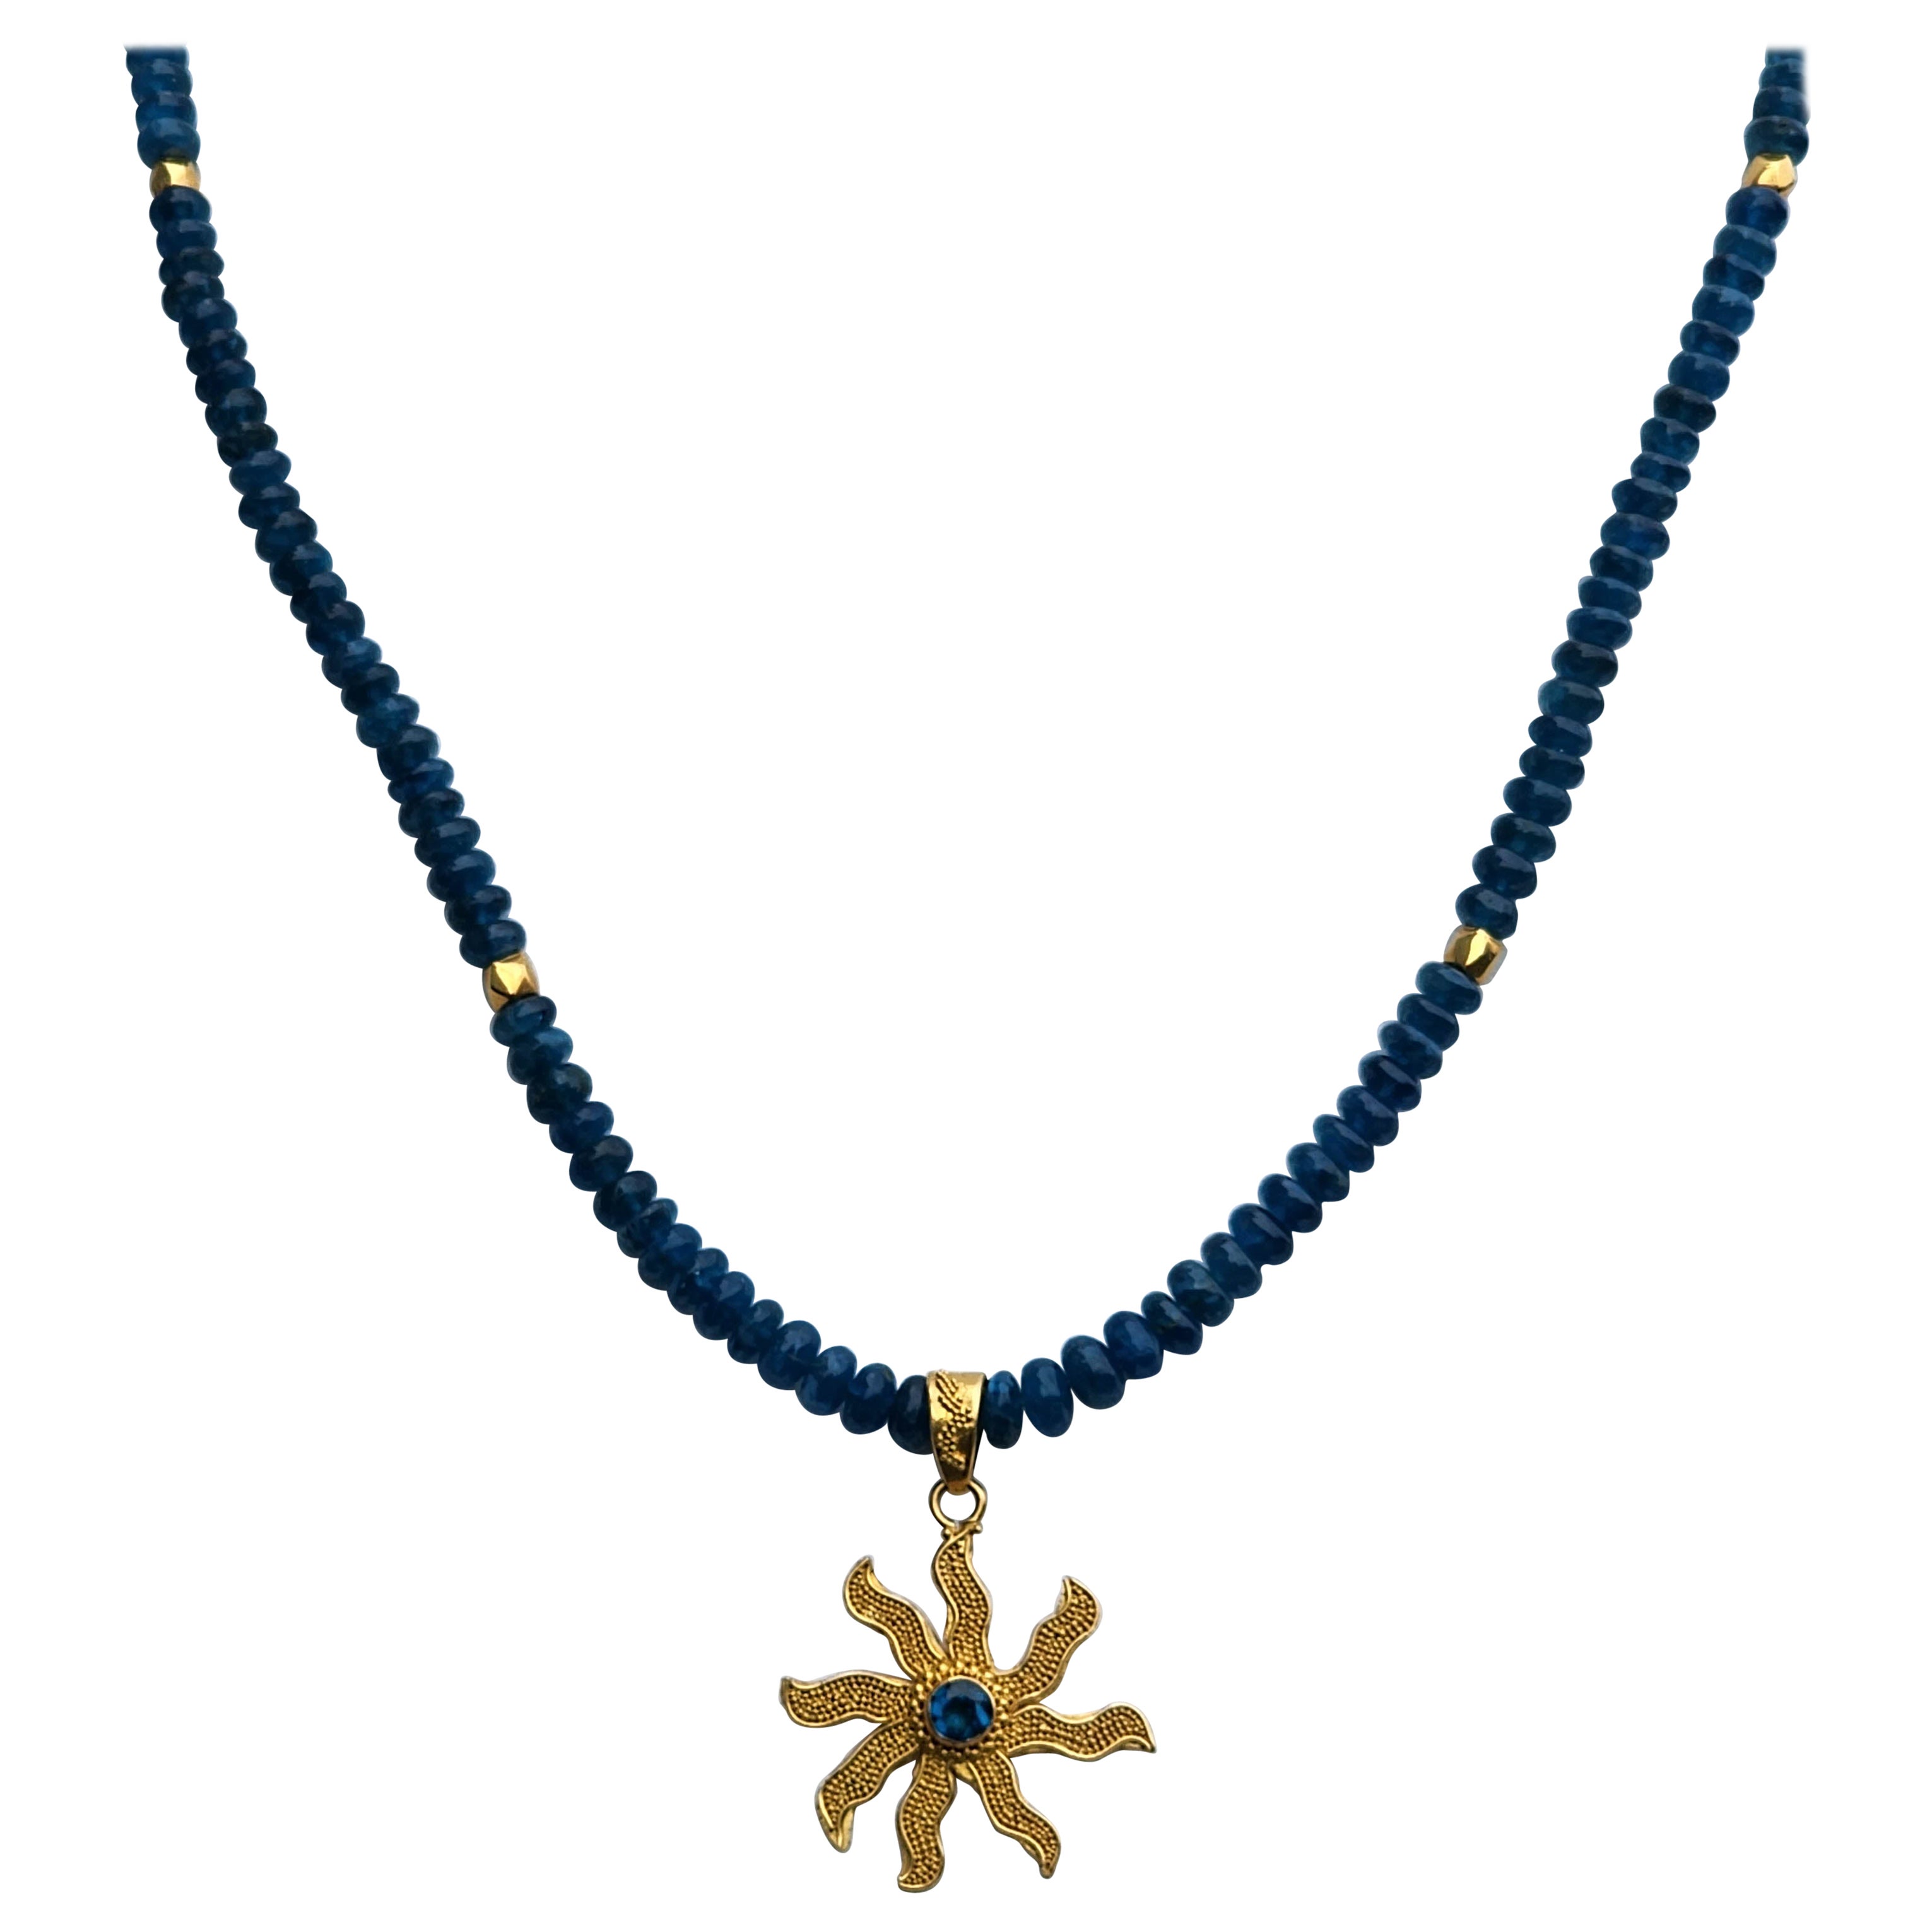 A Beaded Blue Fluorite Necklace of 20 inches with a Gold "22kt" Pendant  For Sale